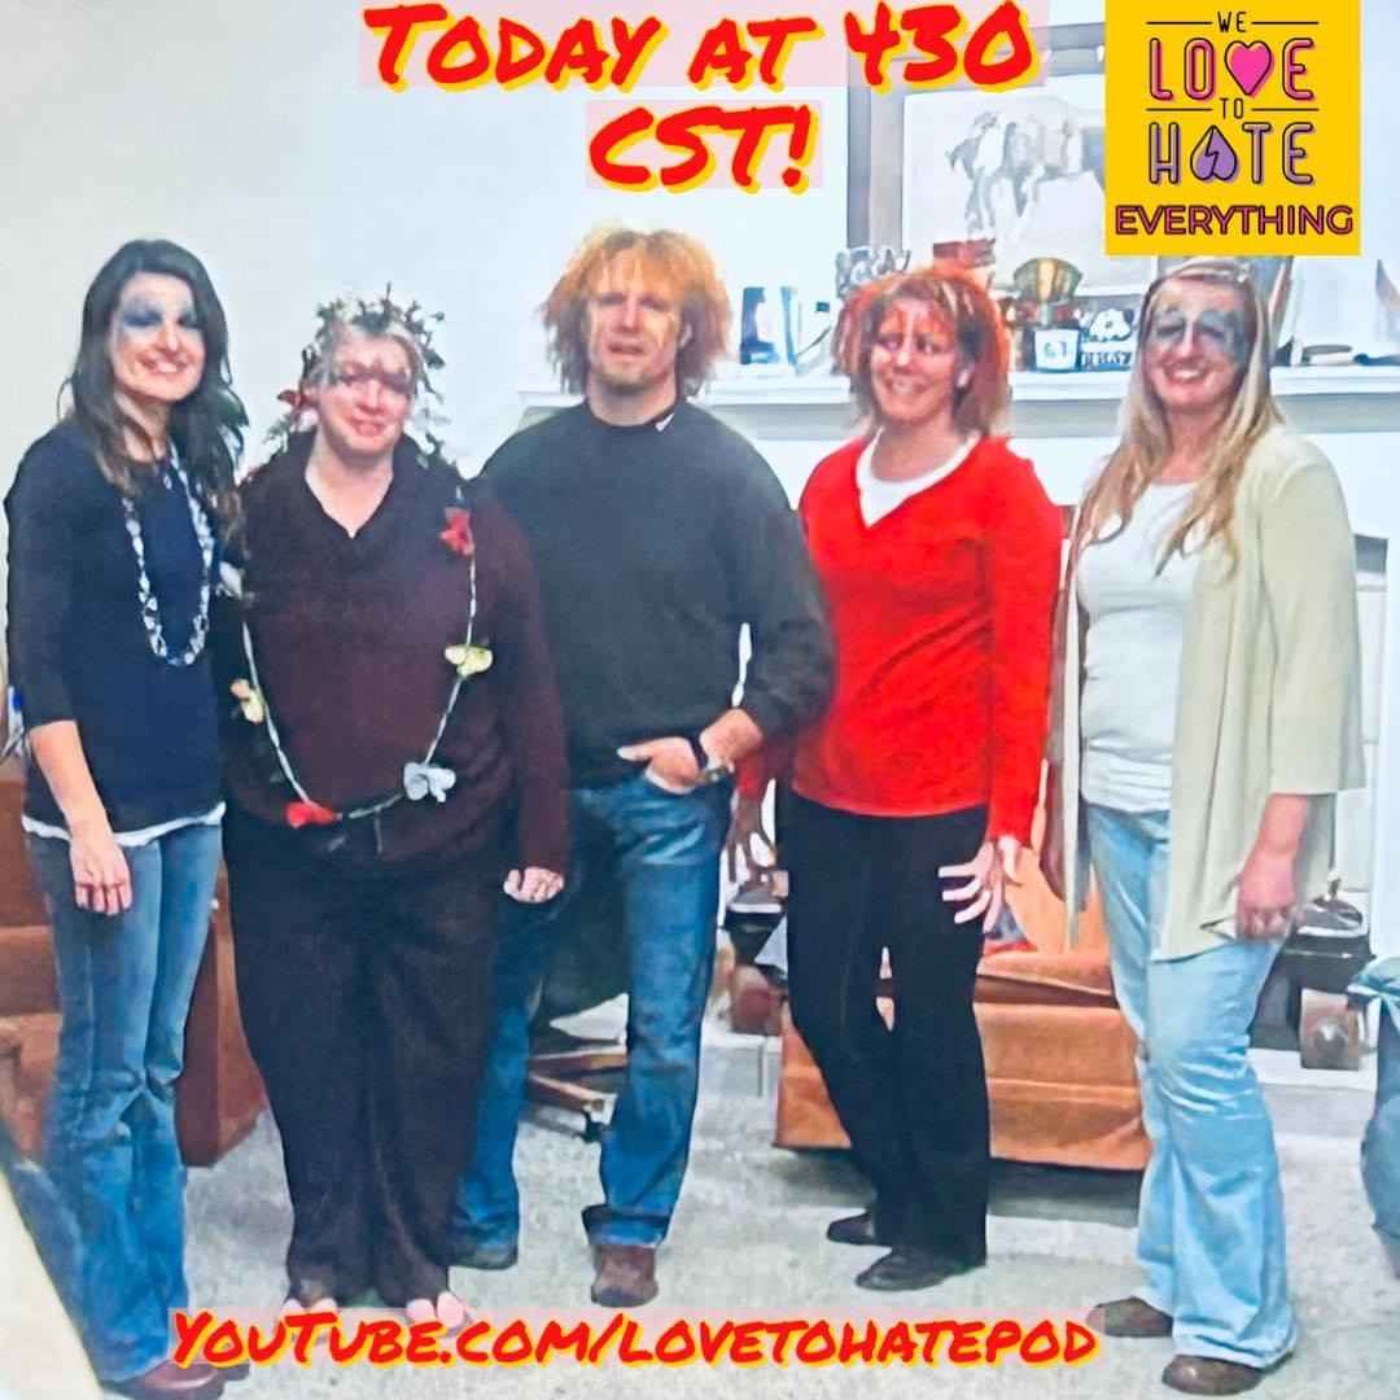 Halloween costume reveal, Hot Topics, Golden Bachelor, a watch-along of Sister Wives S18 E11 ”Airing the Dirty Laundry”